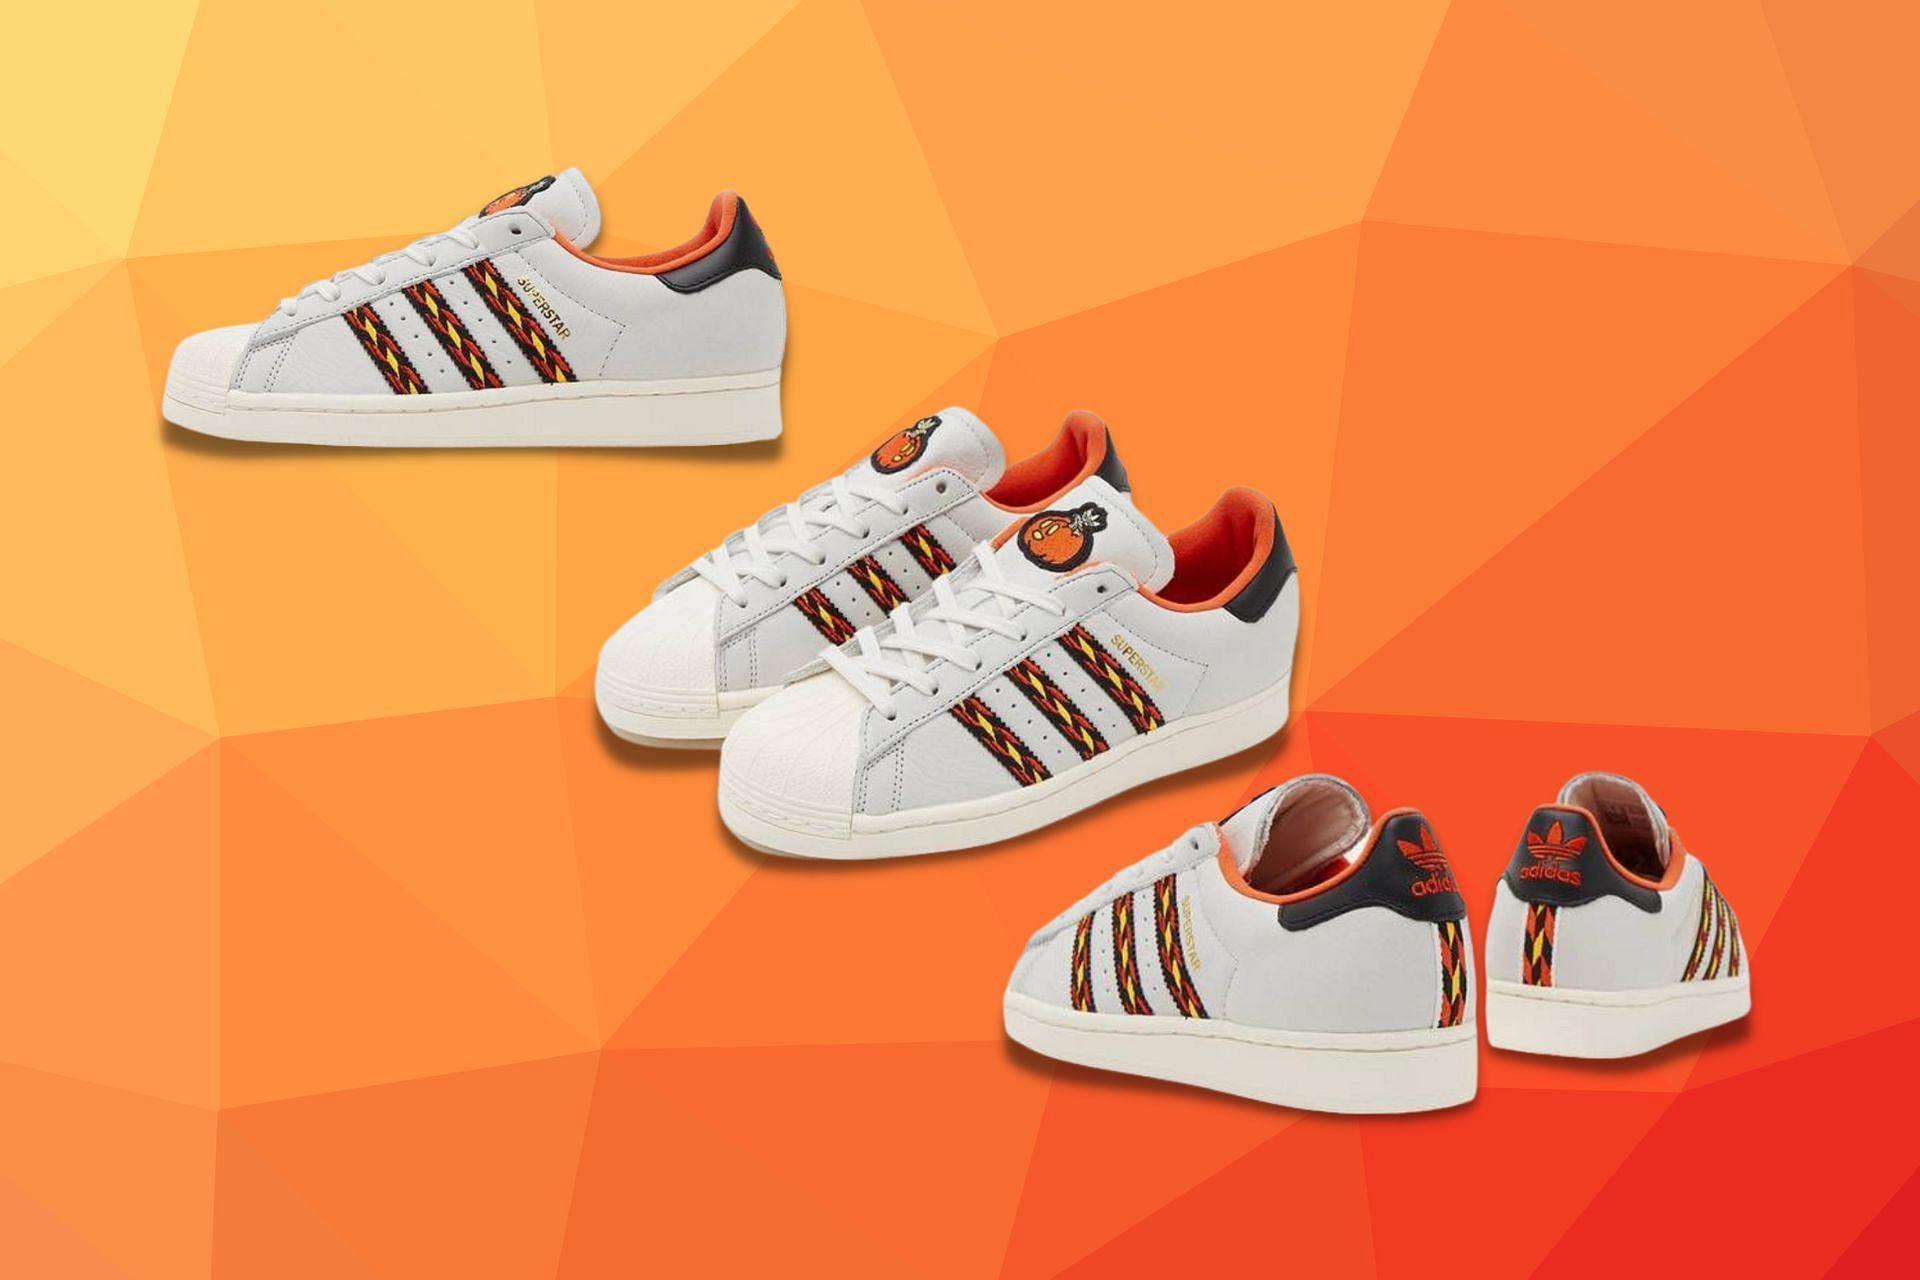 Where to buy Adidas Originals Superstar Halloween shoes? Price and more